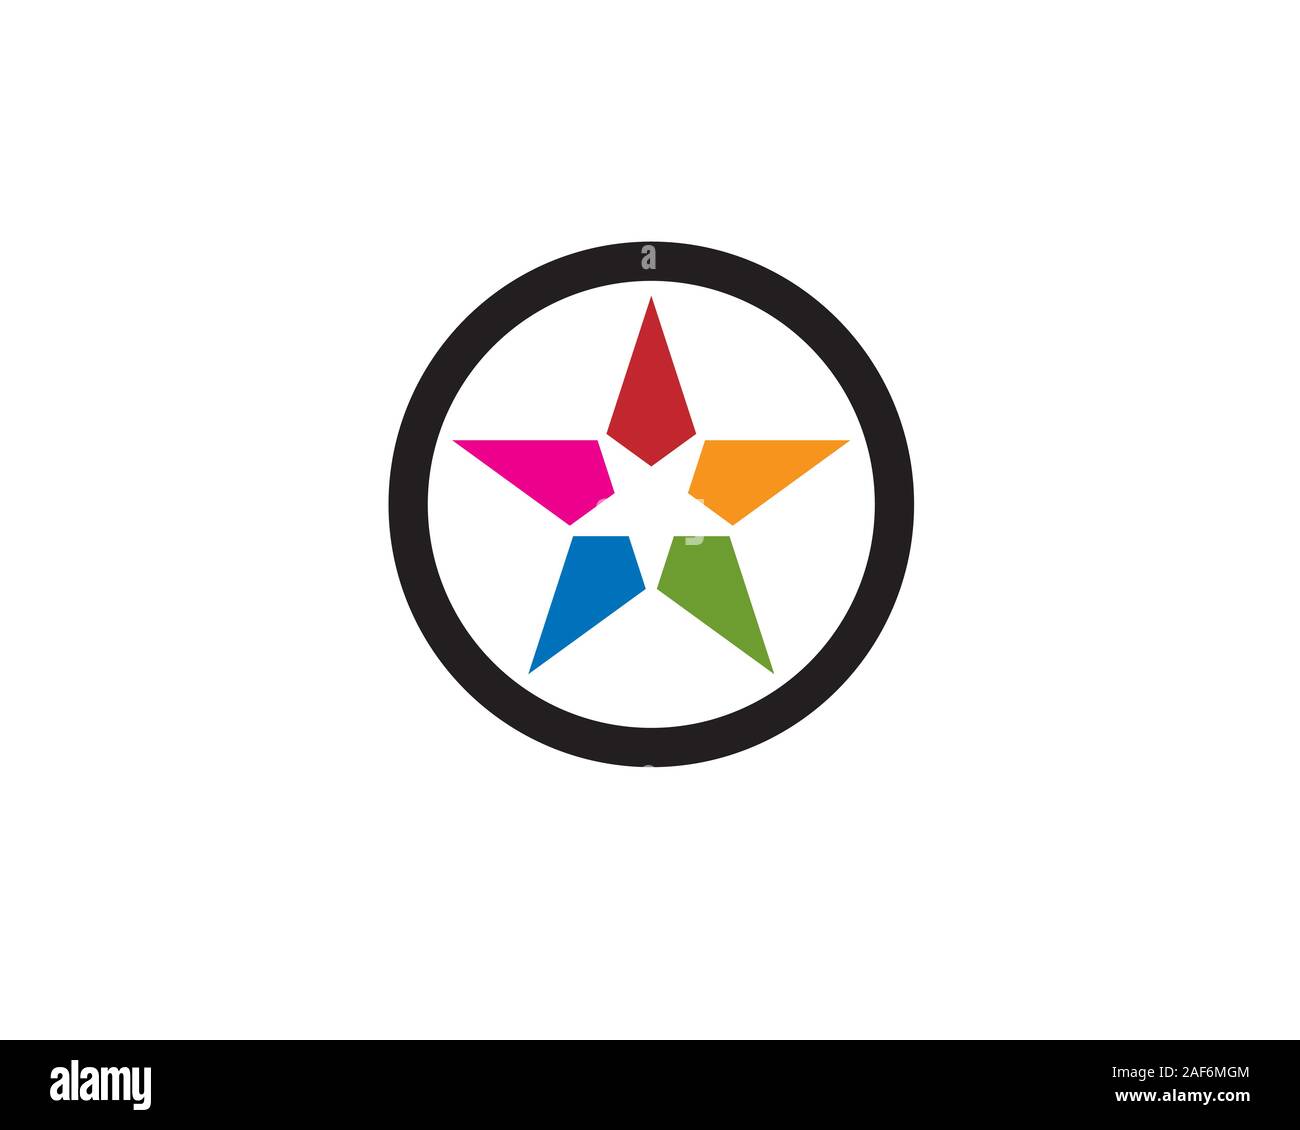 colorful star with small negative space star inside Stock Vector